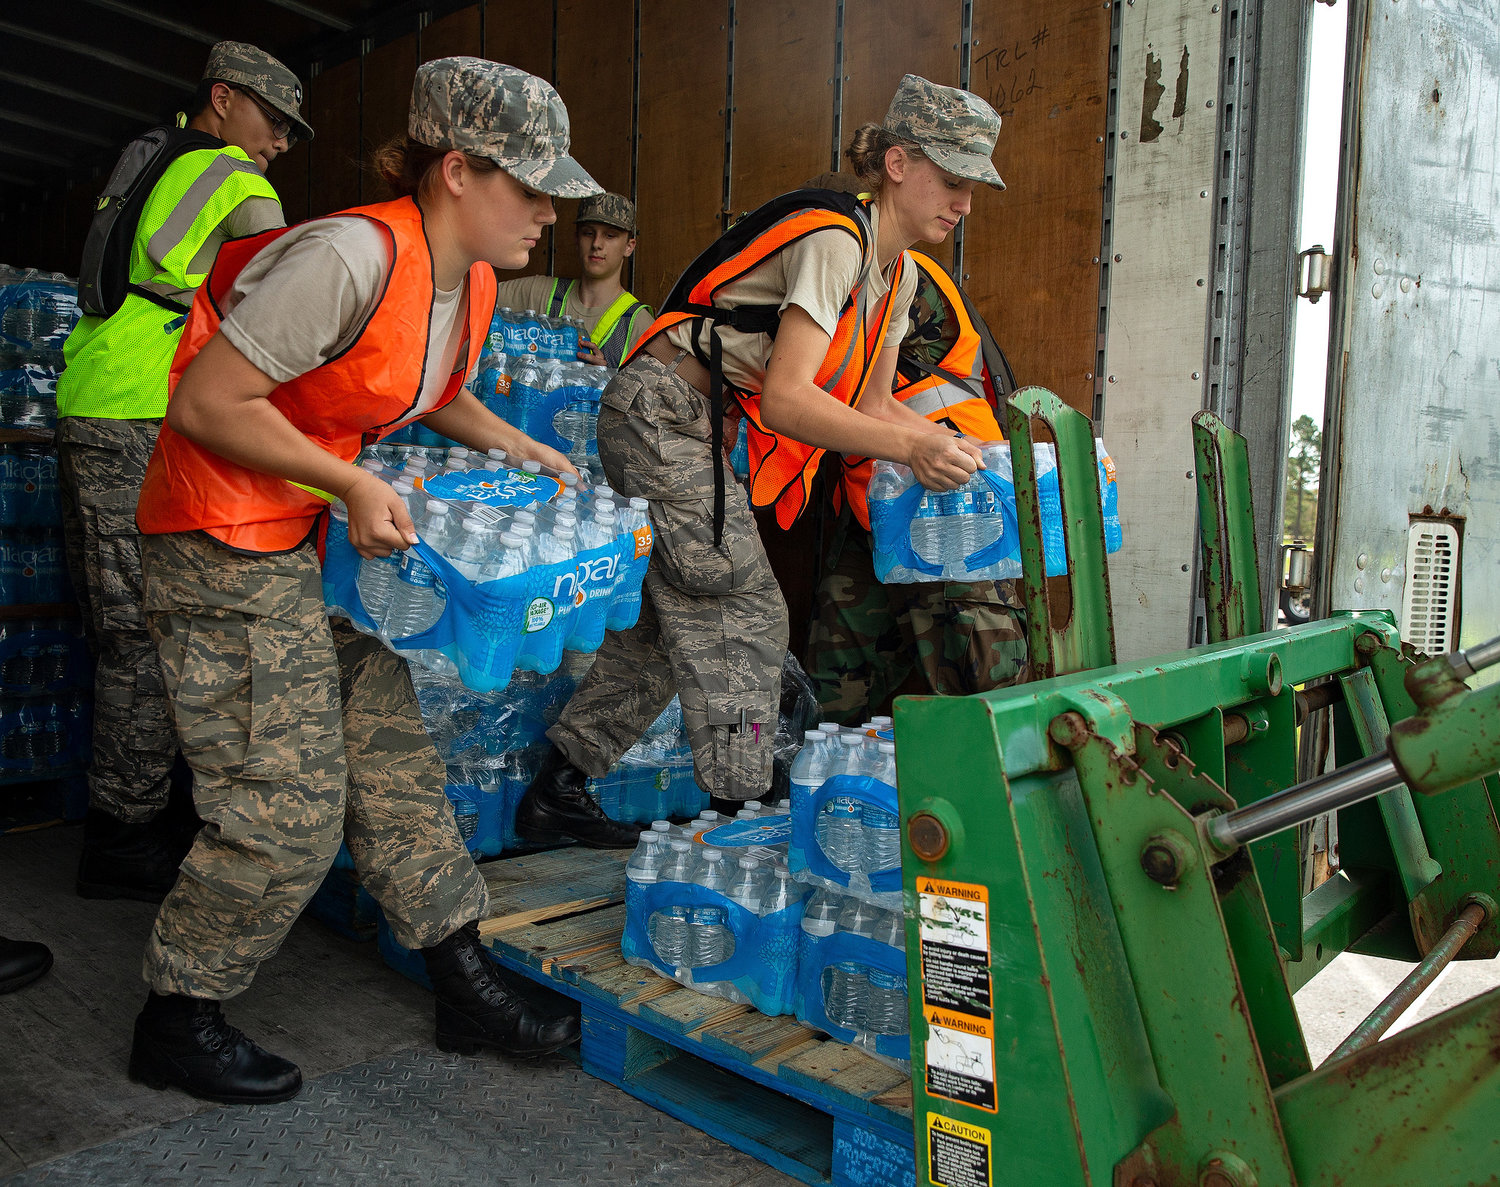 Cadets help victims of Hurricane Florence in 2018. Here, Cadet Chief Master Sgt. Moriah Hersch, from MER-MD-065, left, and Cadet Airman Karmen Jones from MER-MD-065 unload water from a trailer outside of Wilmington, NC.